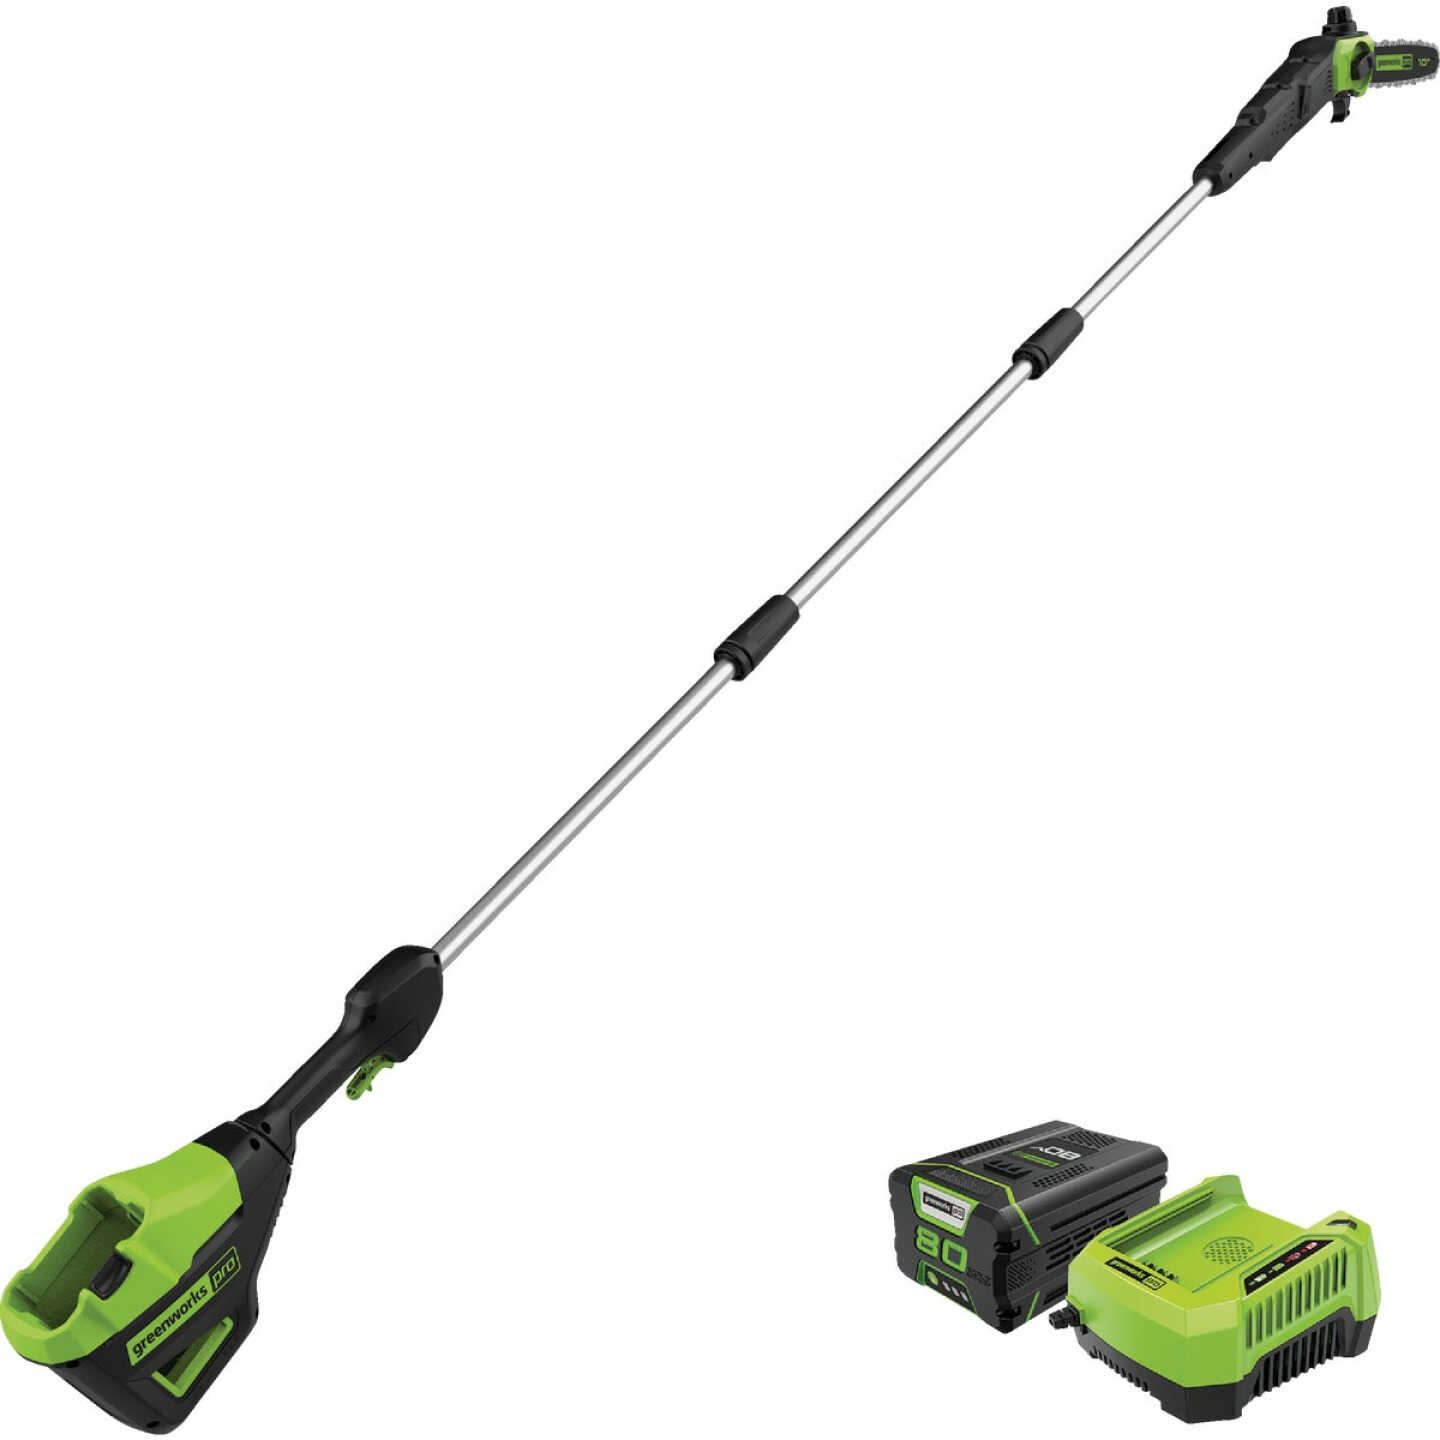 Greenworks Pro 80V 10 In. Cordless Pole Saw w/Battery & Charger - Foley  Hardware